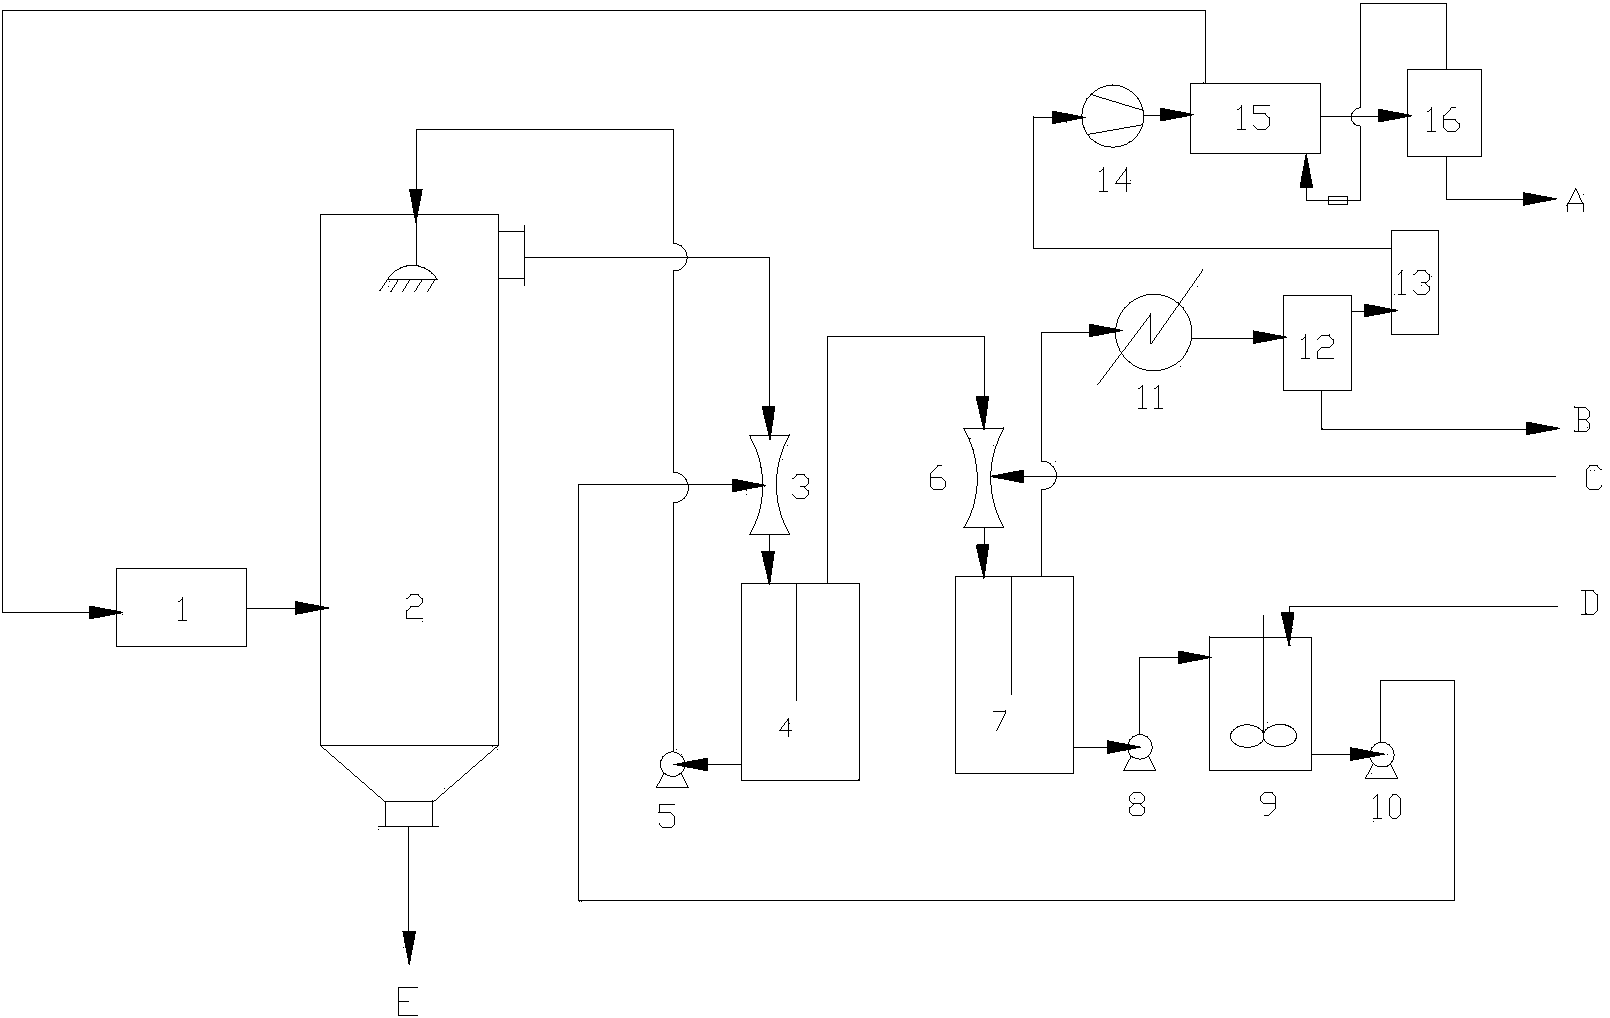 System for preparing liquid SO2 from concentrated waste acid